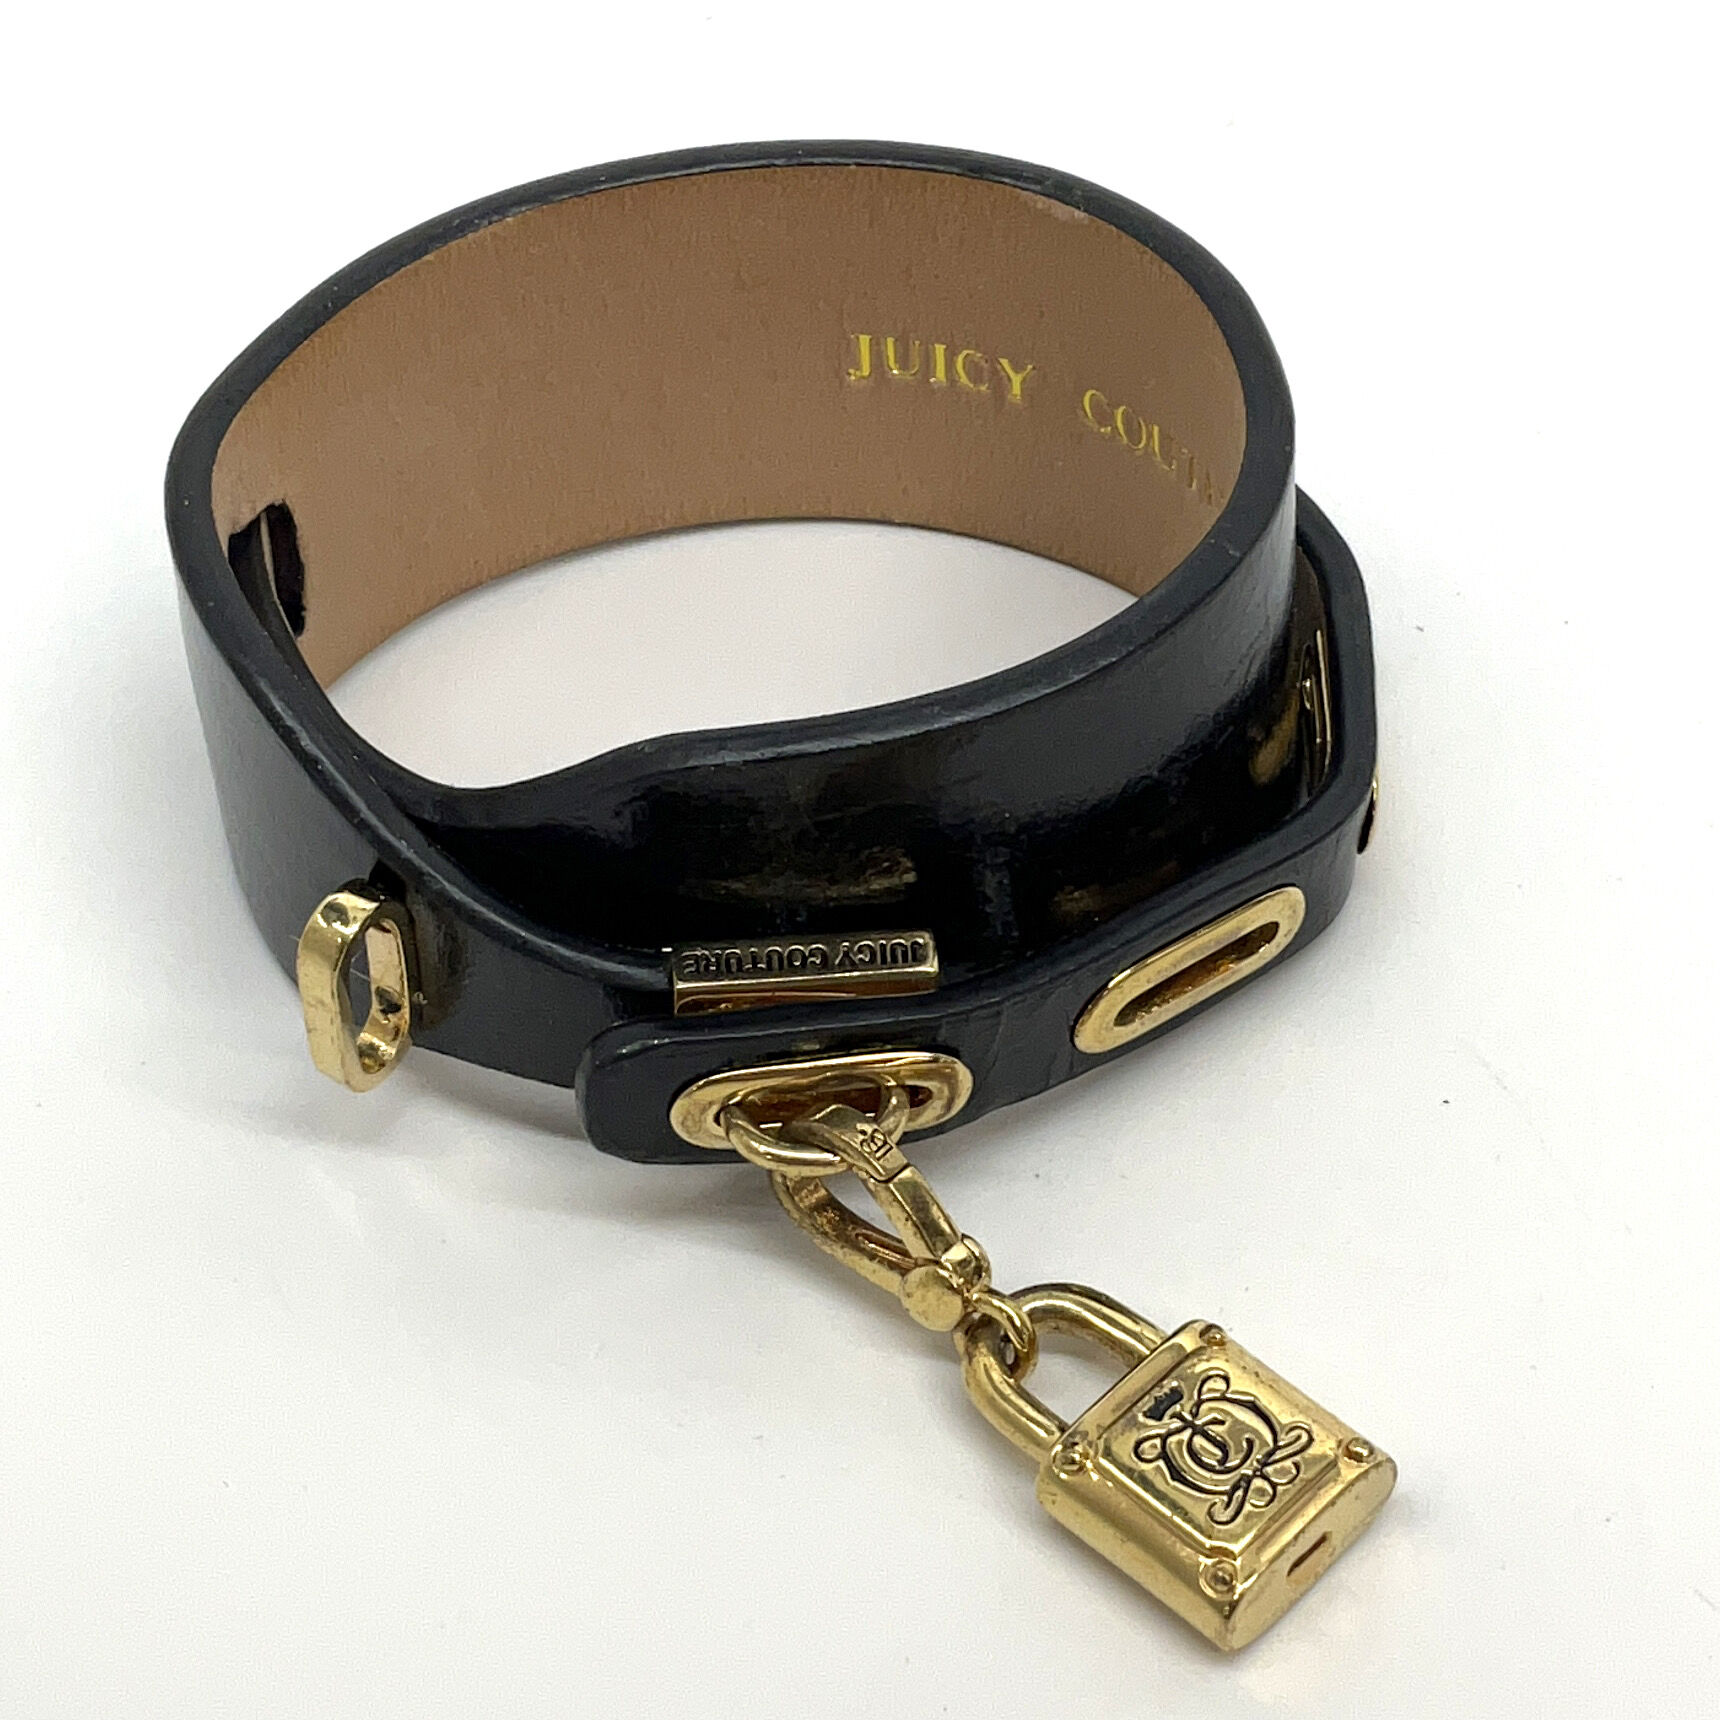 Luxurious High Gold Leather Bracelet: Style and Sophistication Combined